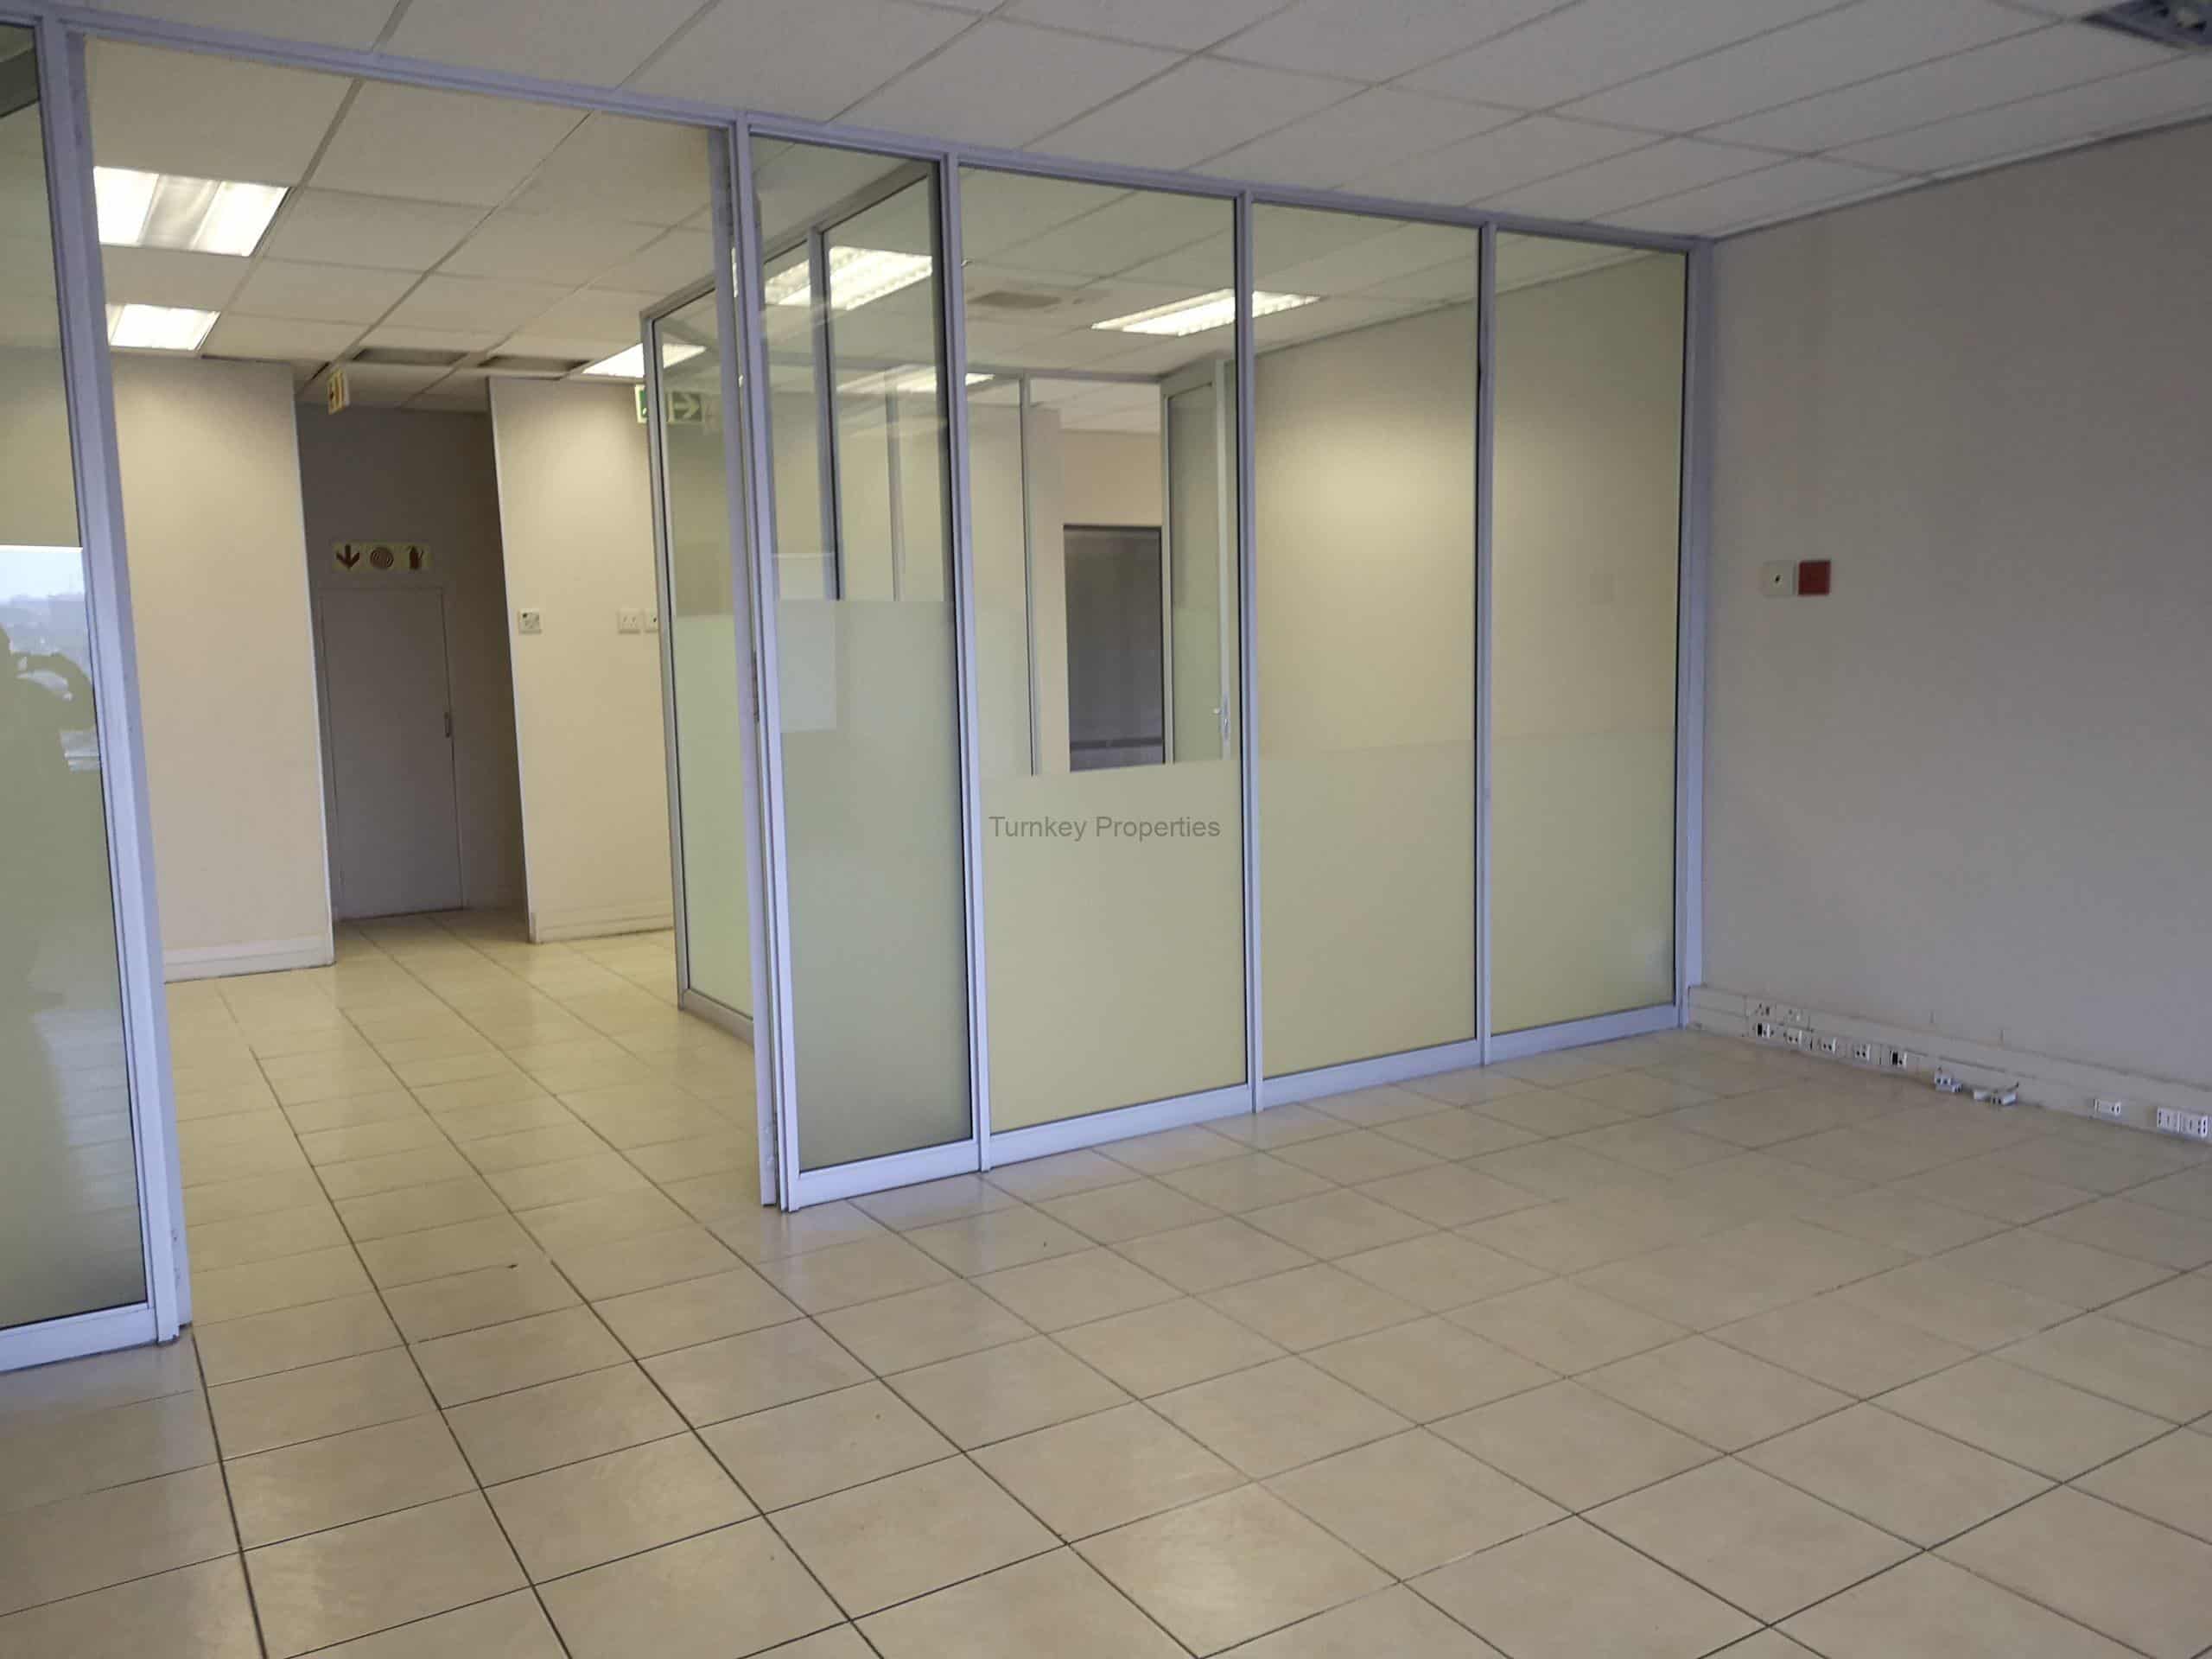 254m² office to let bryanston Coachman crossing office park